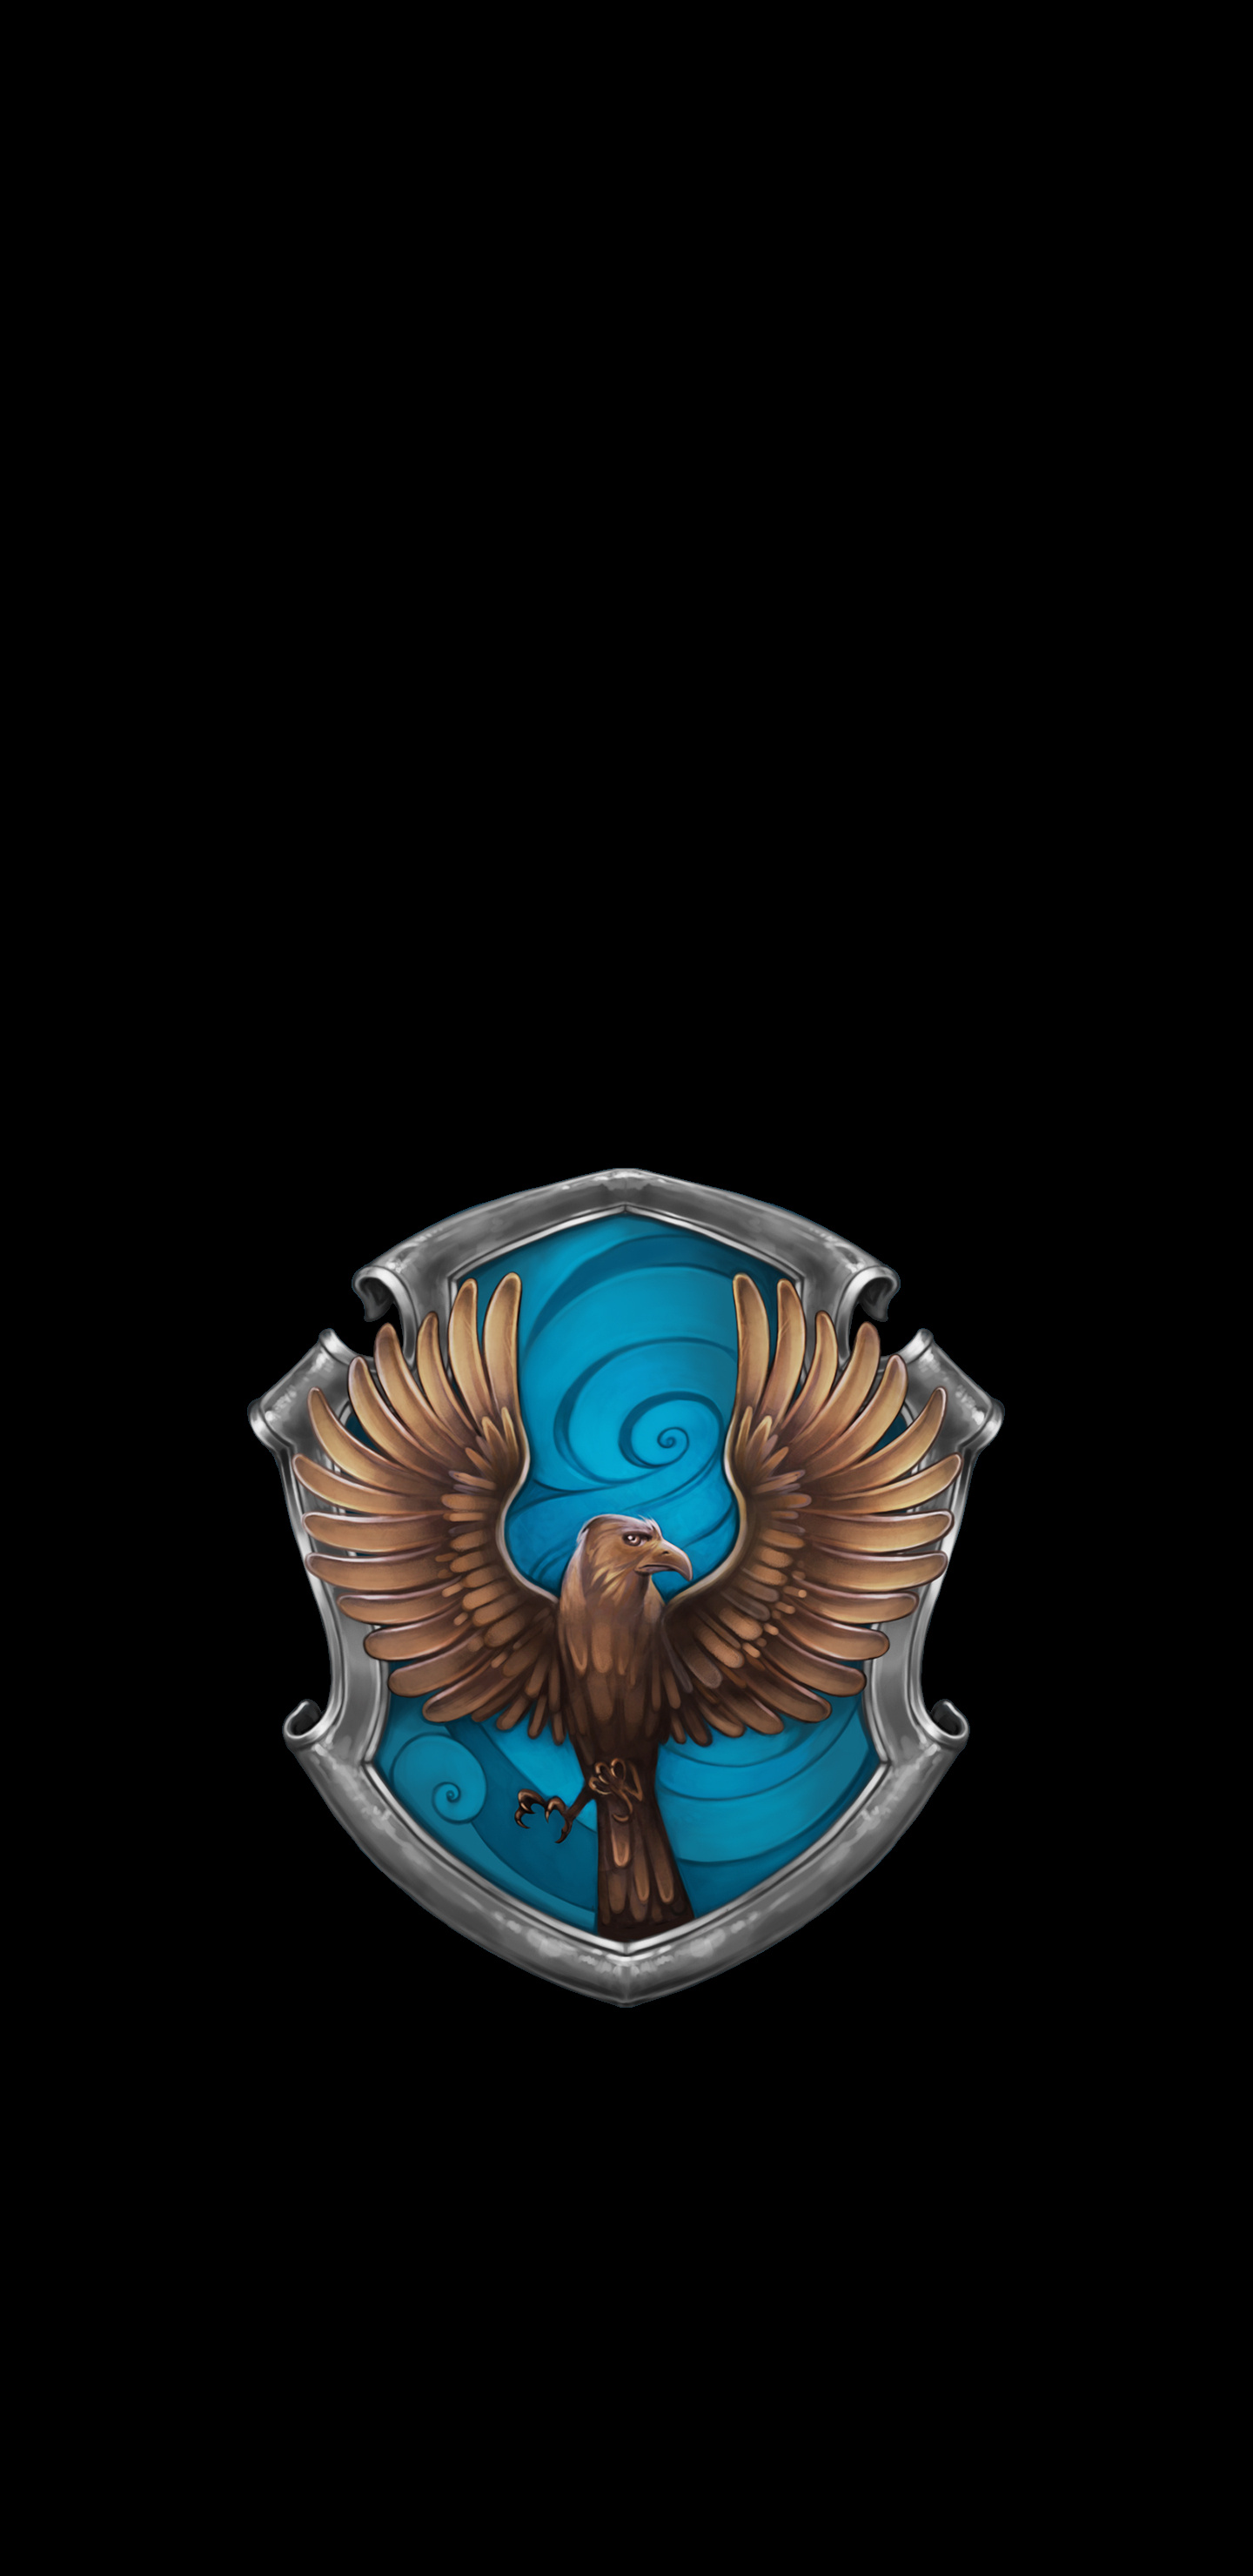 Ravenclaw & Slytherin, House crest, Amoled wallpaper, Mobile phones, 1440x2960 HD Phone